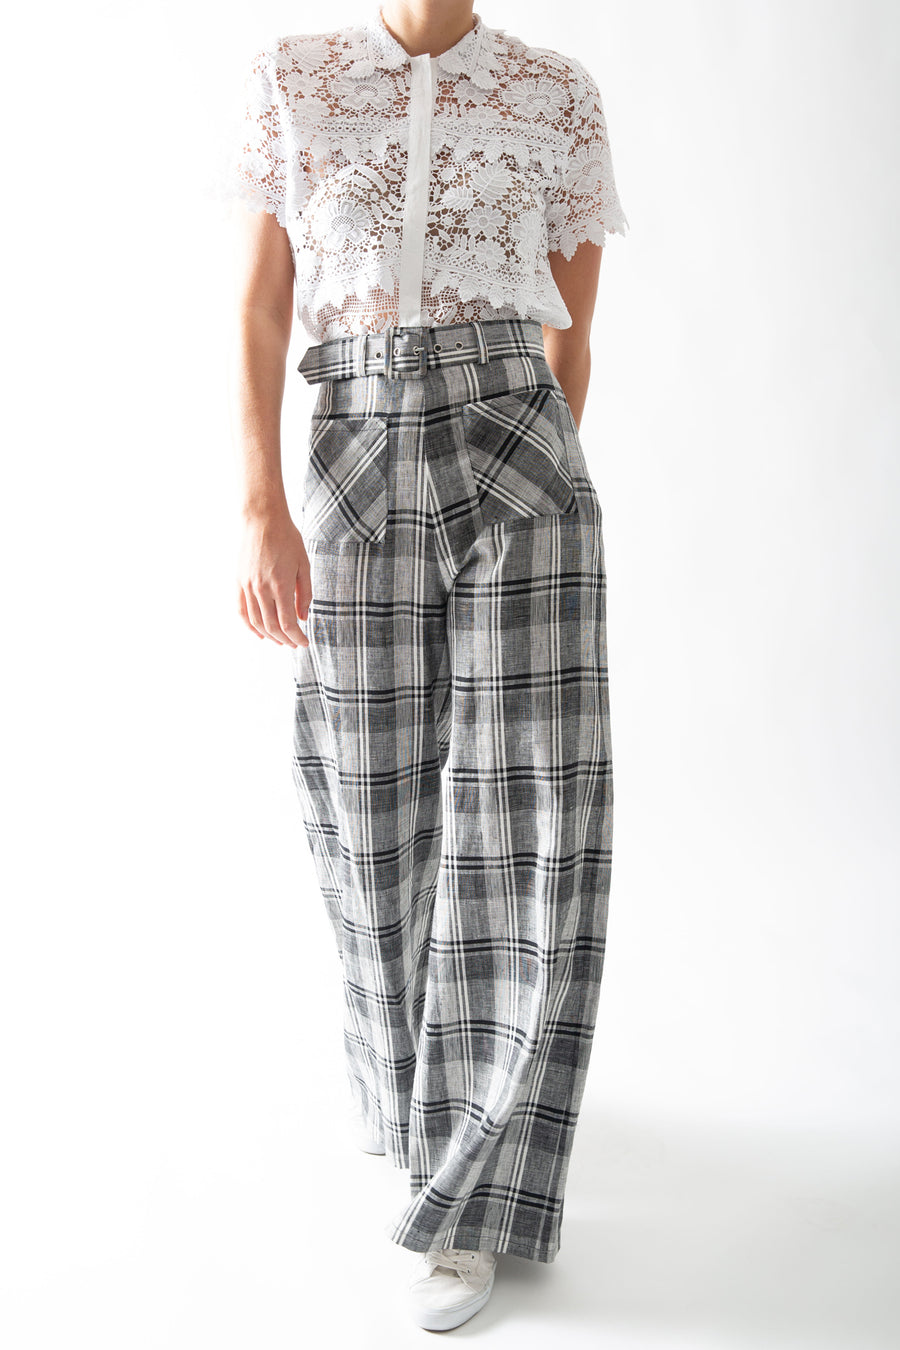 This is a photo of a woman from the neck down, she is wearing a lace, collared, button front top tucked into plaid wide leg pants. The top is a detailed floral lace embroidery, with leaf shaped scallops throughout.